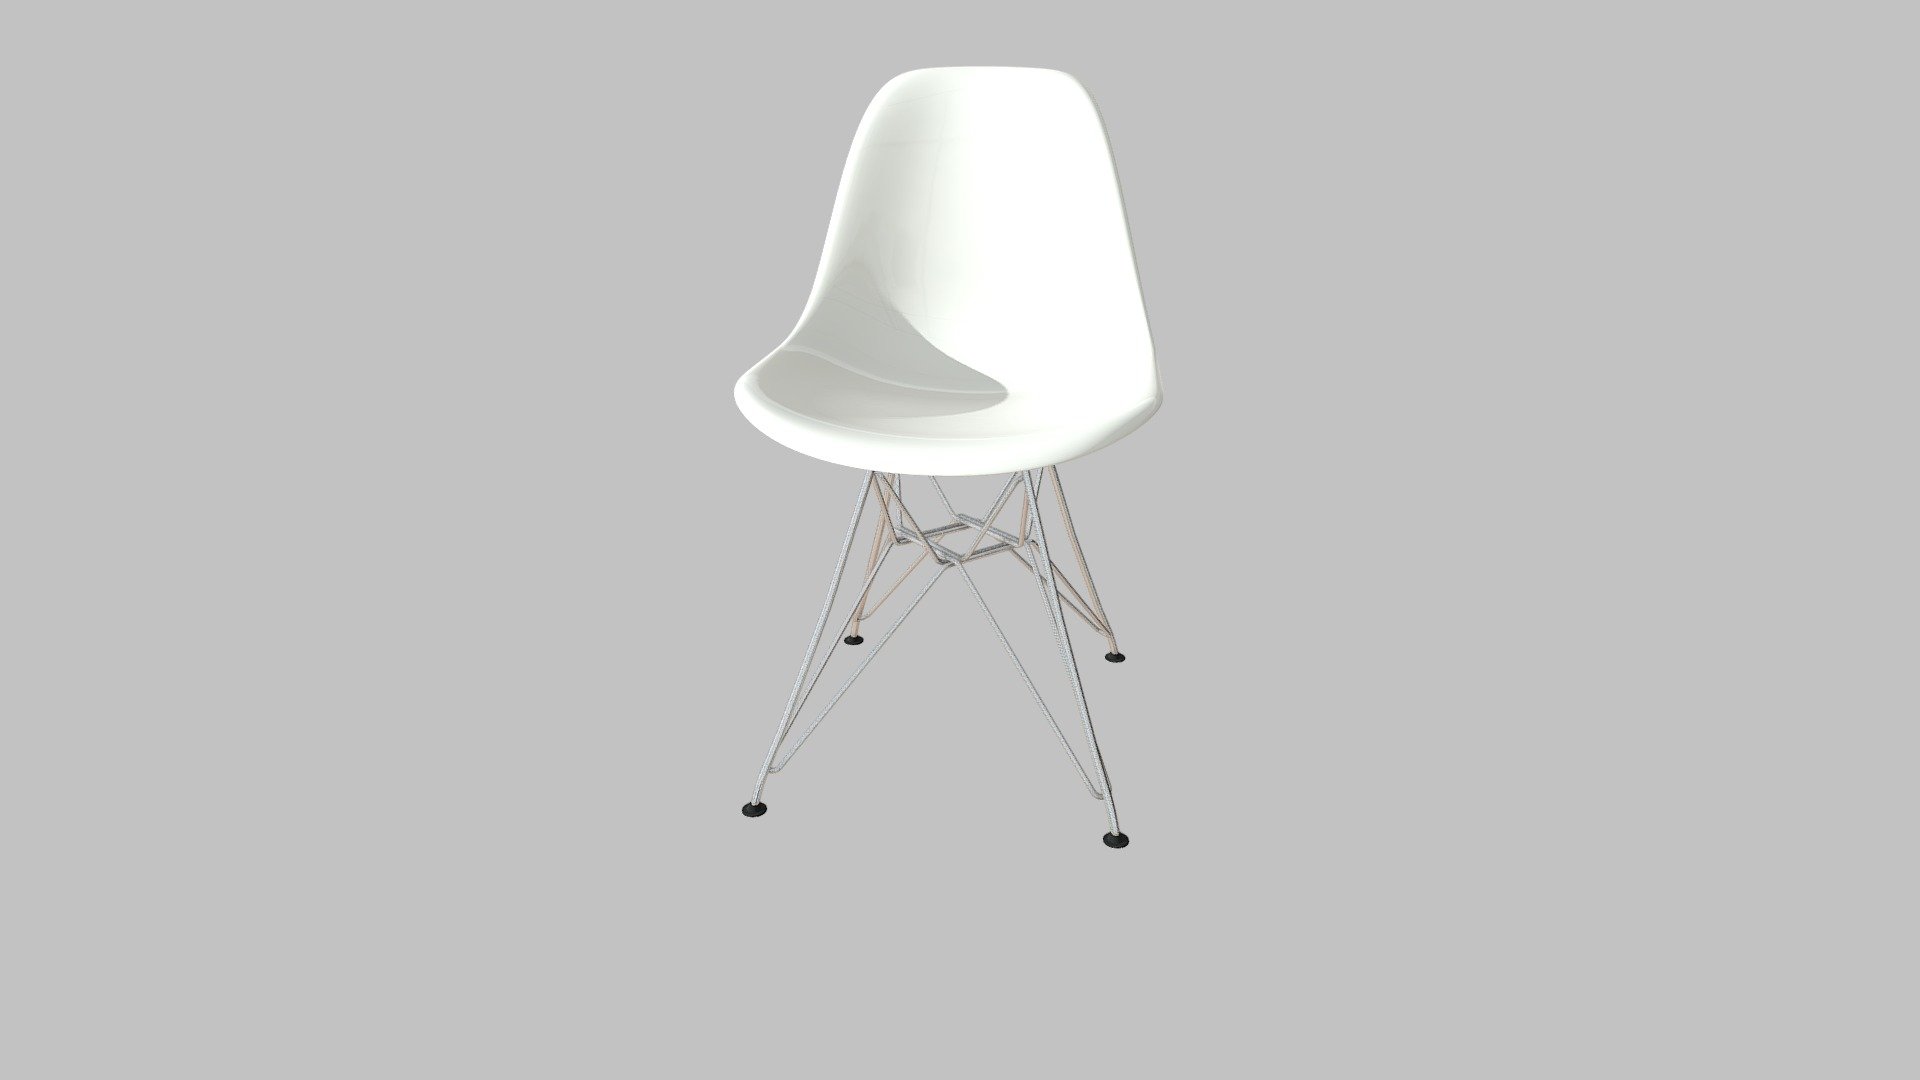 www.zuomod.com/zip-dining-chair-white

The Ultimate in Mid-Century Modern styling shine in the Zip dining or accent chair featuring molded ABS plastic seat/back supported by slim spire type chrome base with black feet 3d model